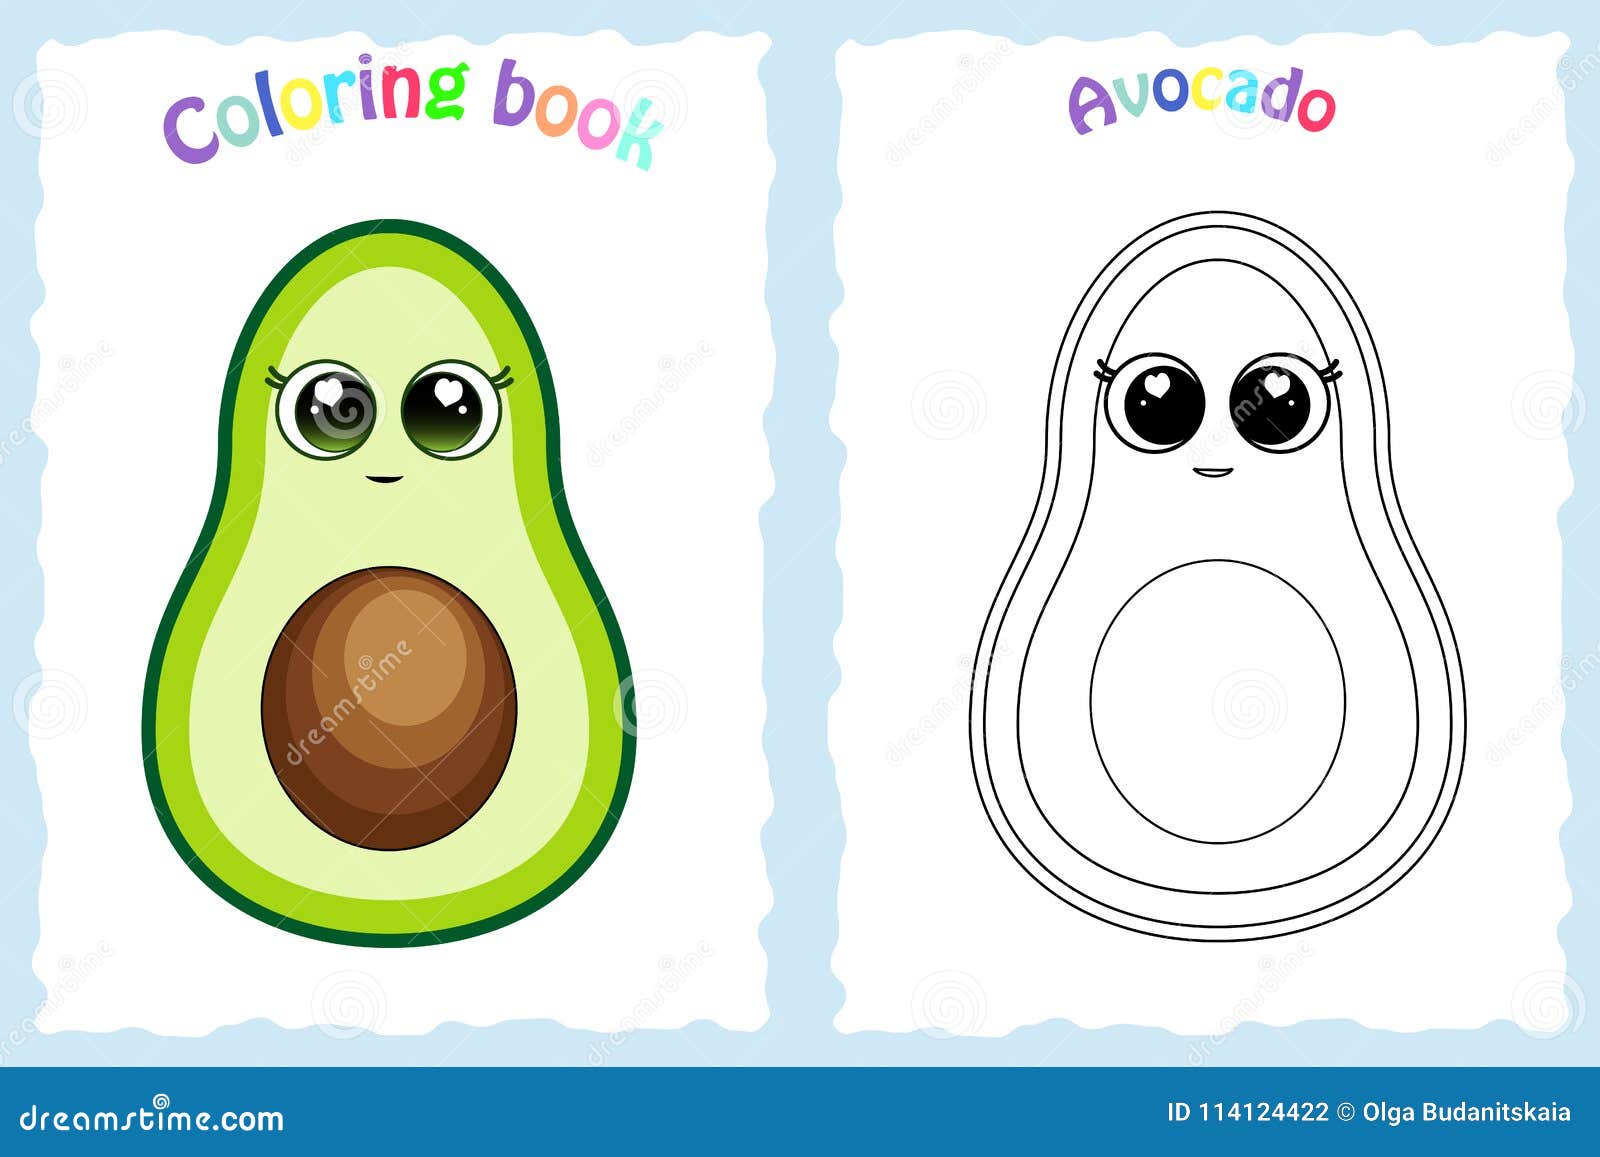 Coloring book page for preschool children with colorful avocado stock vector